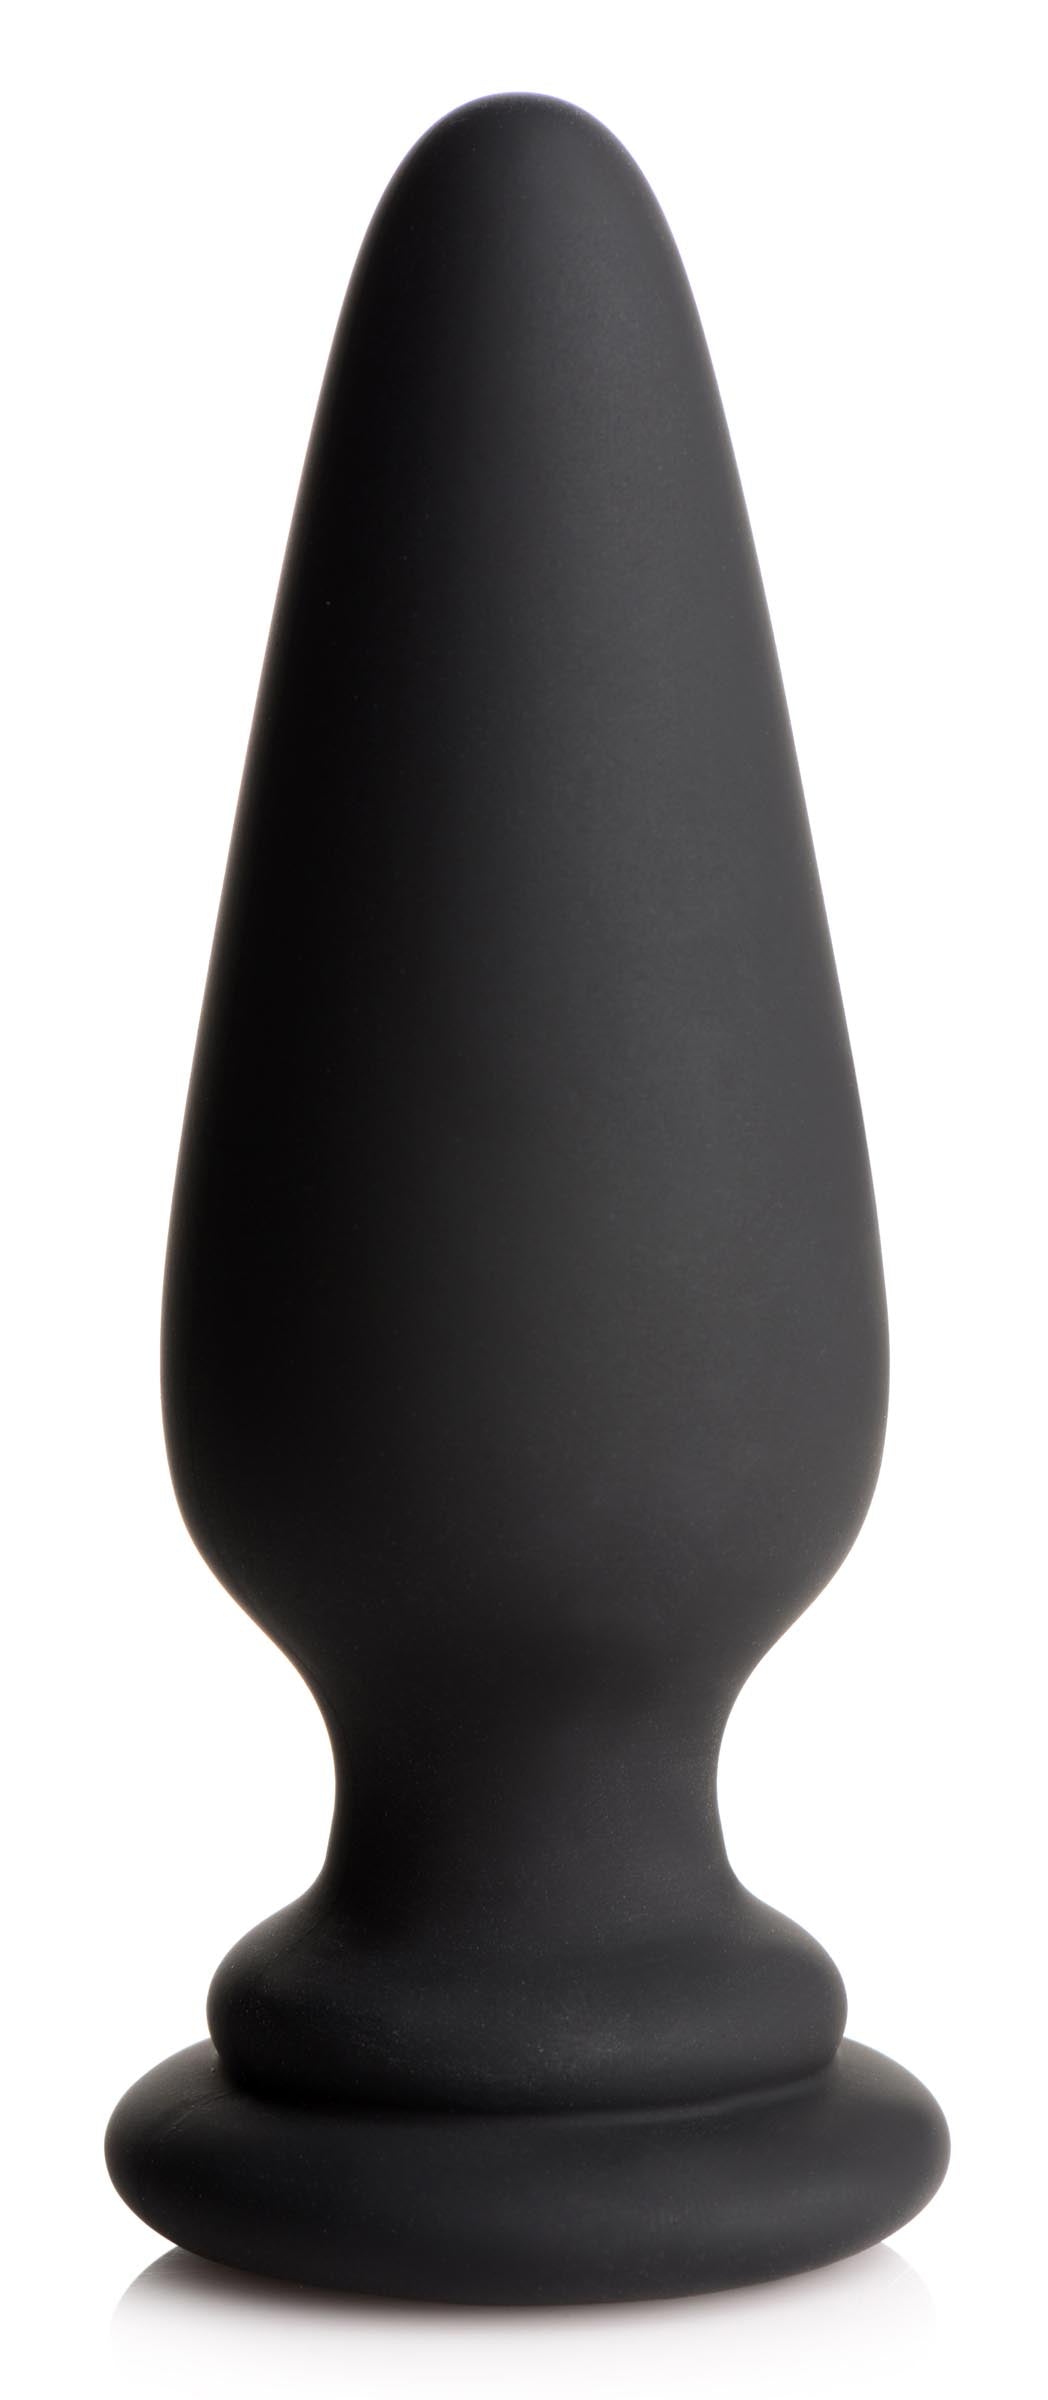 Large Anal Plug with Interchangeable Bunny Tail - Black - UABDSM